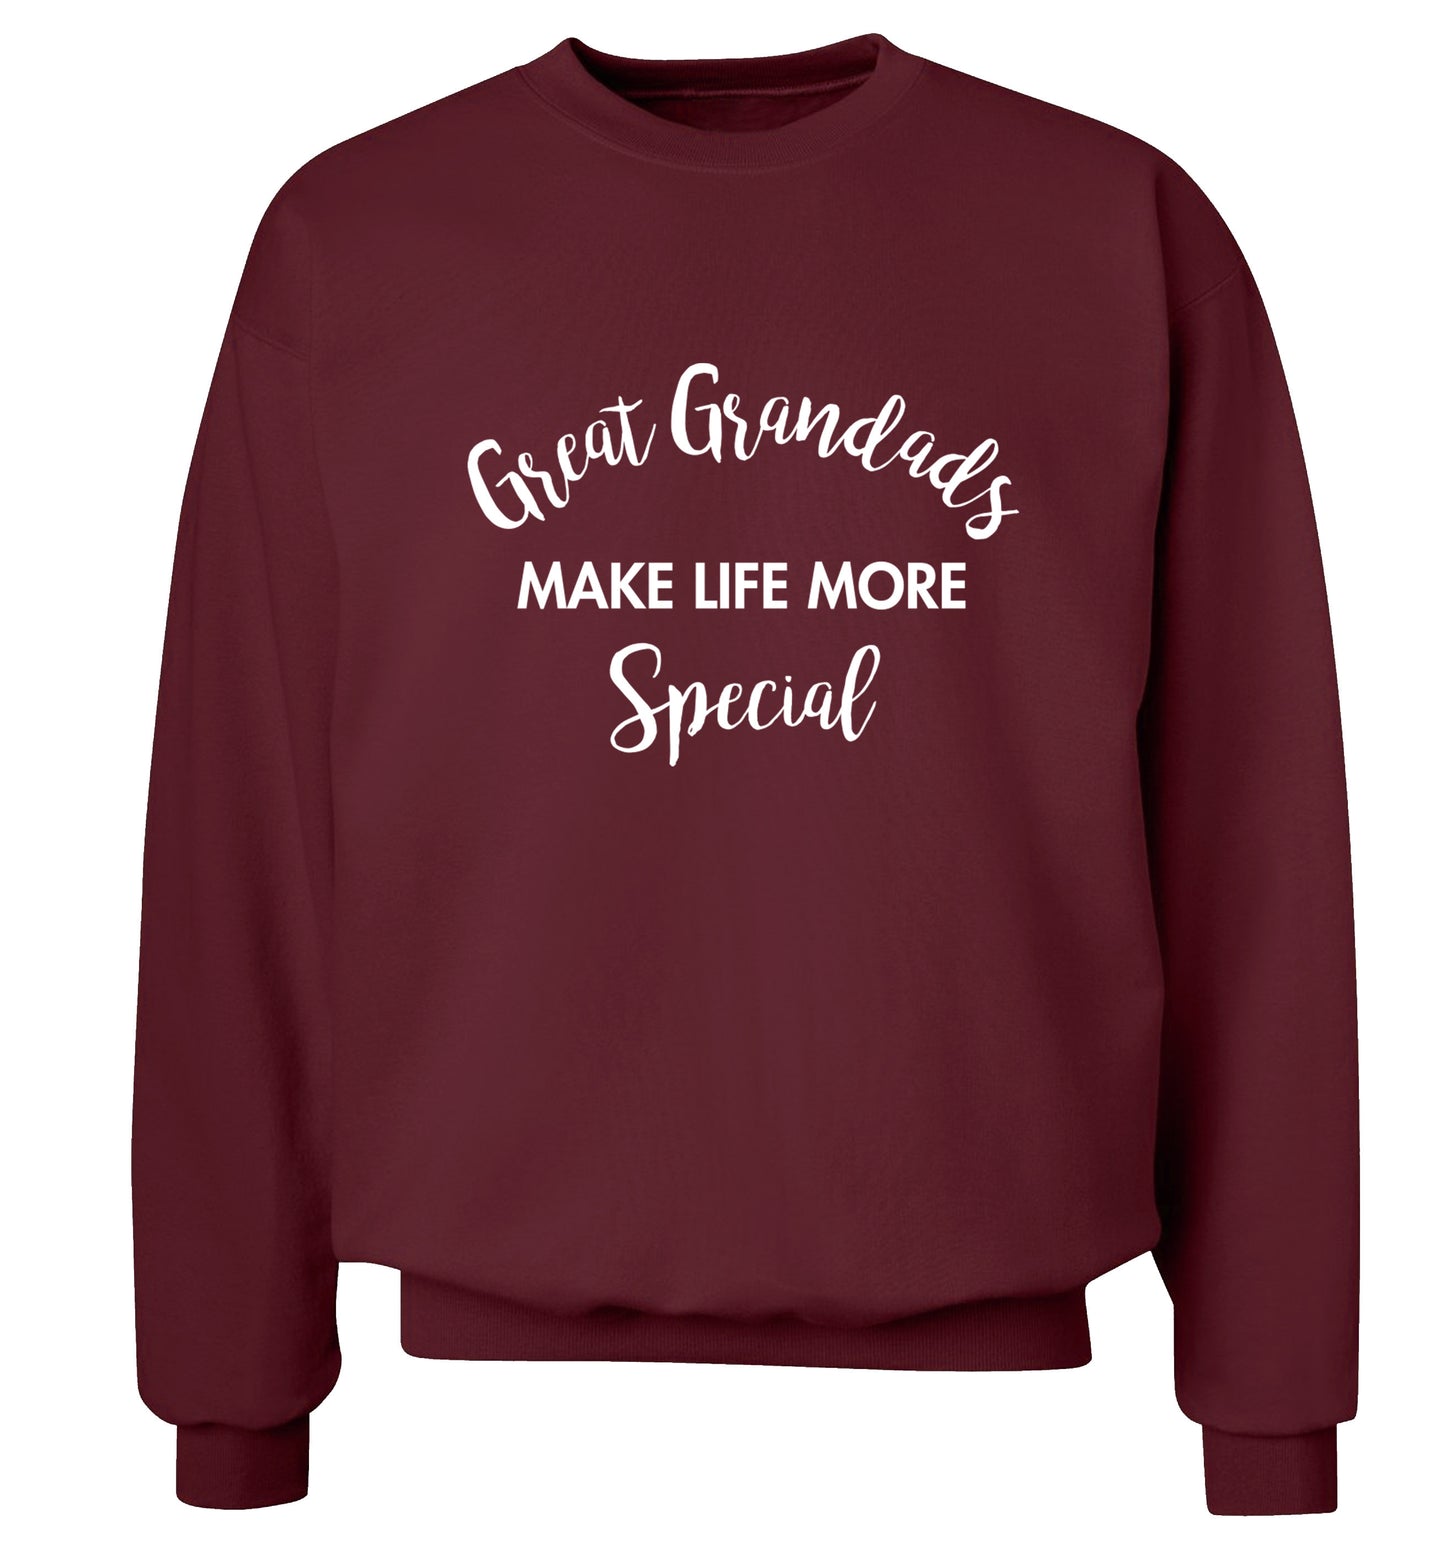 Great Grandads make life more special Adult's unisex maroon Sweater 2XL